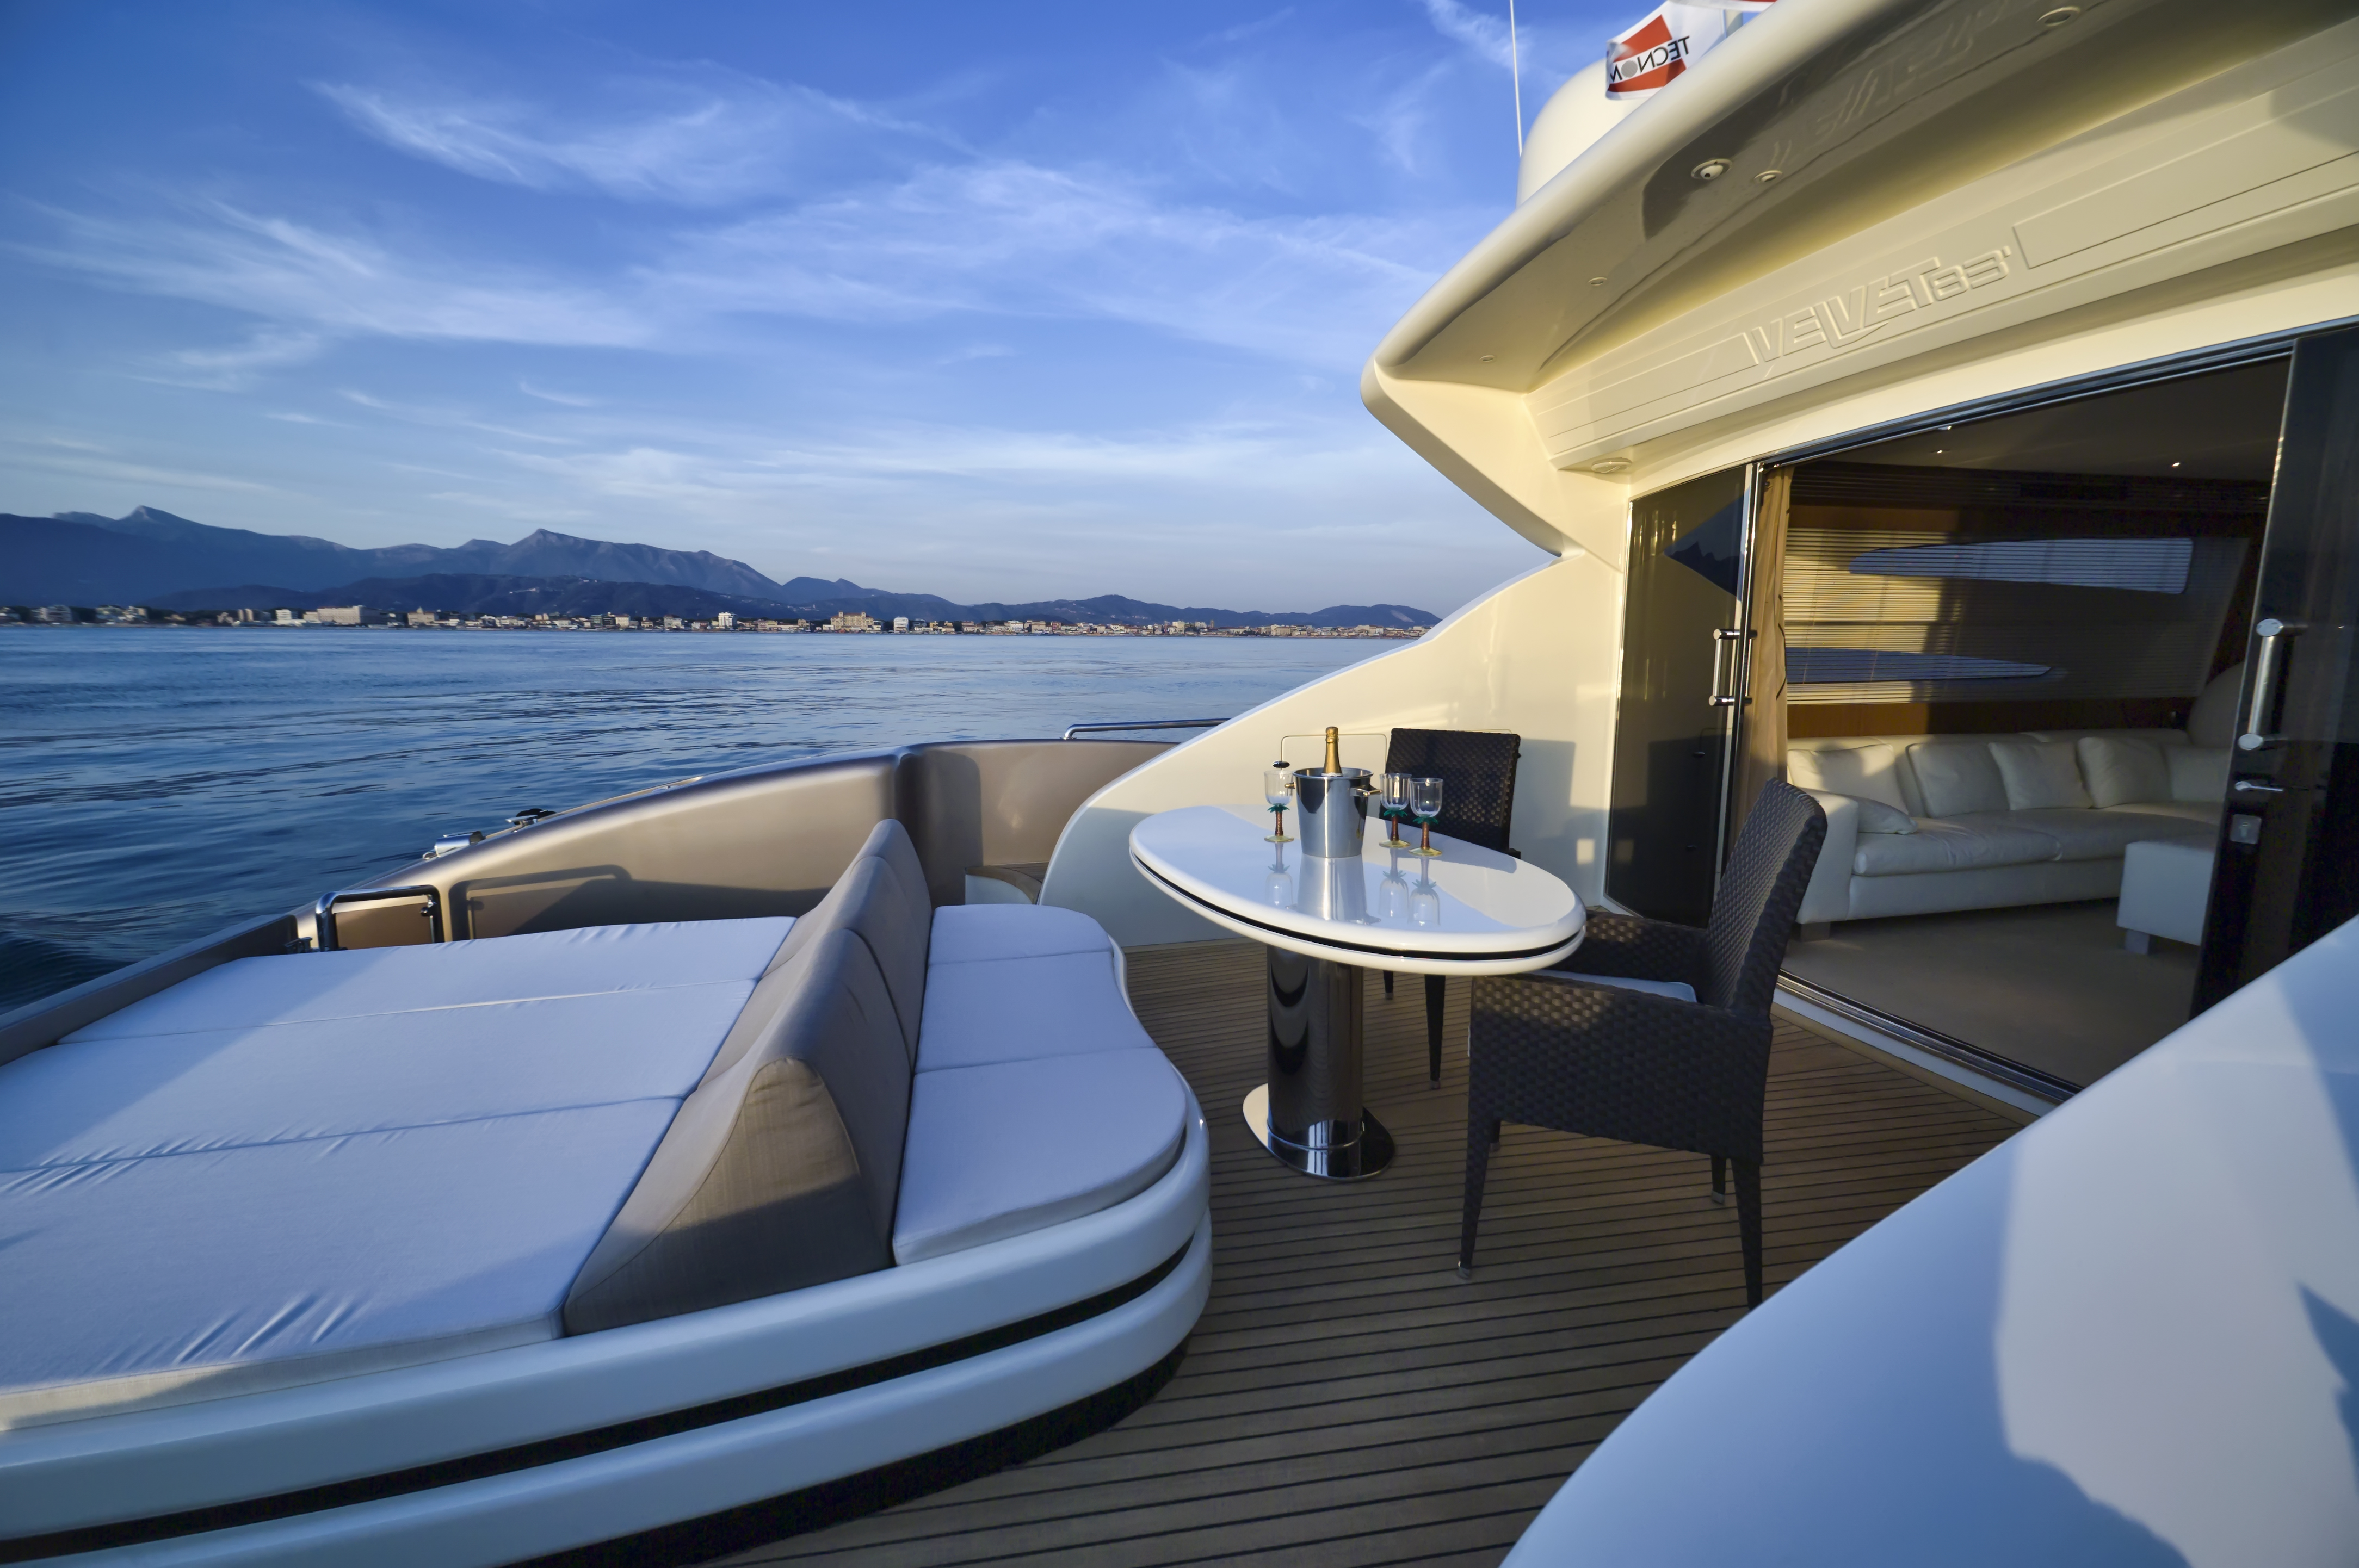 The first Versilia Yachting Rendez-vous will be held in Tuscany Viareggio, May 2017